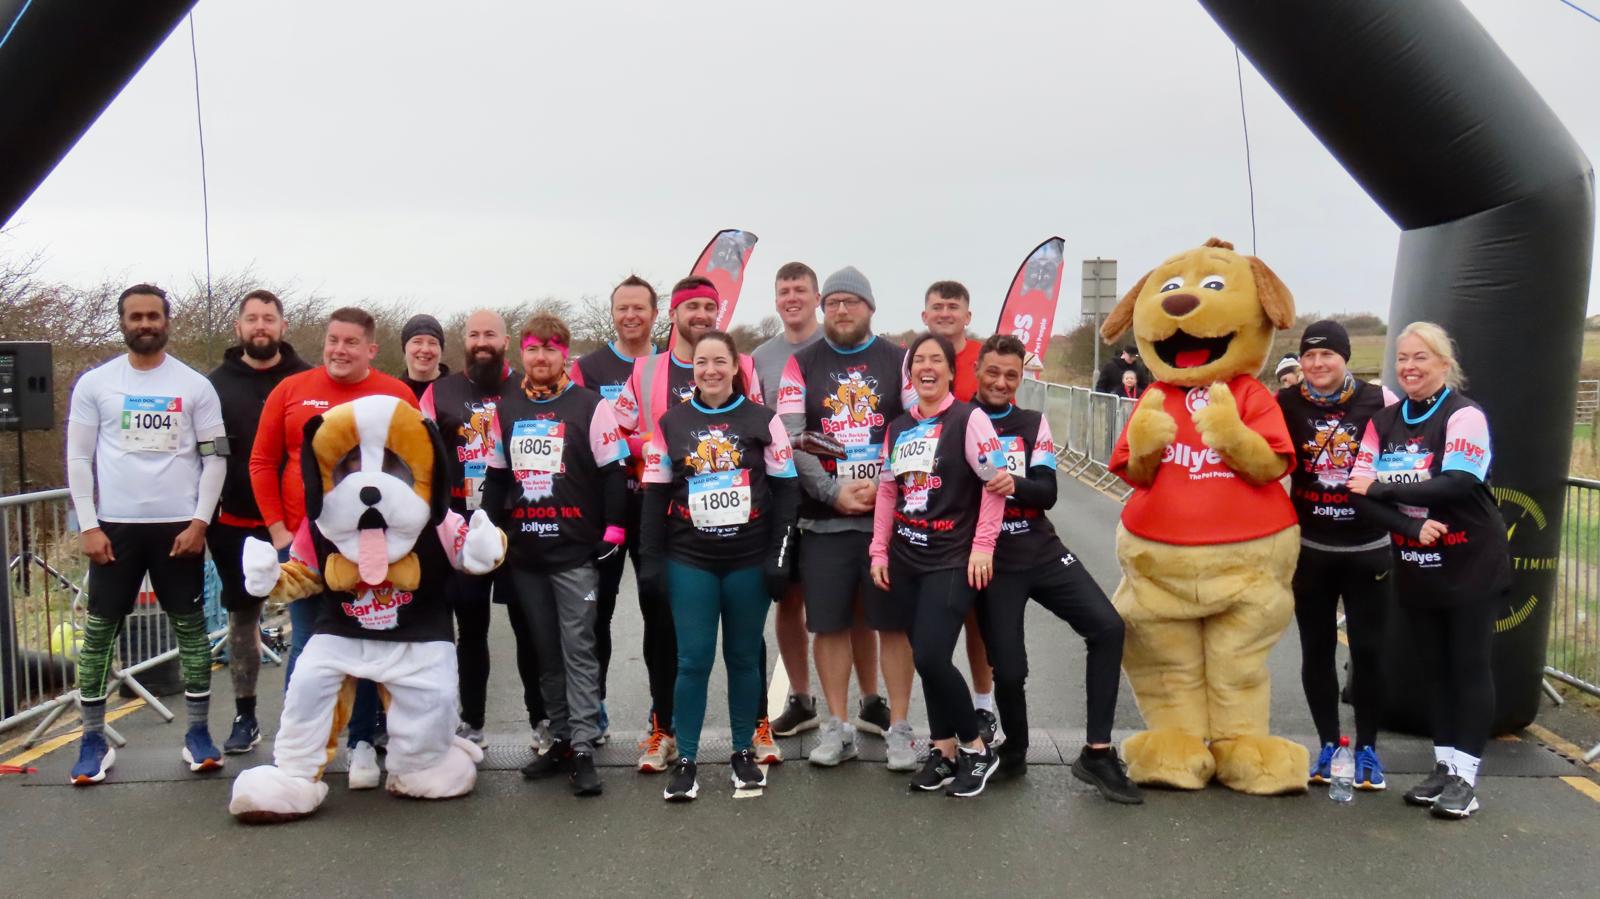 Hundreds of runners enjoyed the Southport Mad Dog 10lk run sponsored by Jollyes - The Pet People. The Jollyes team 